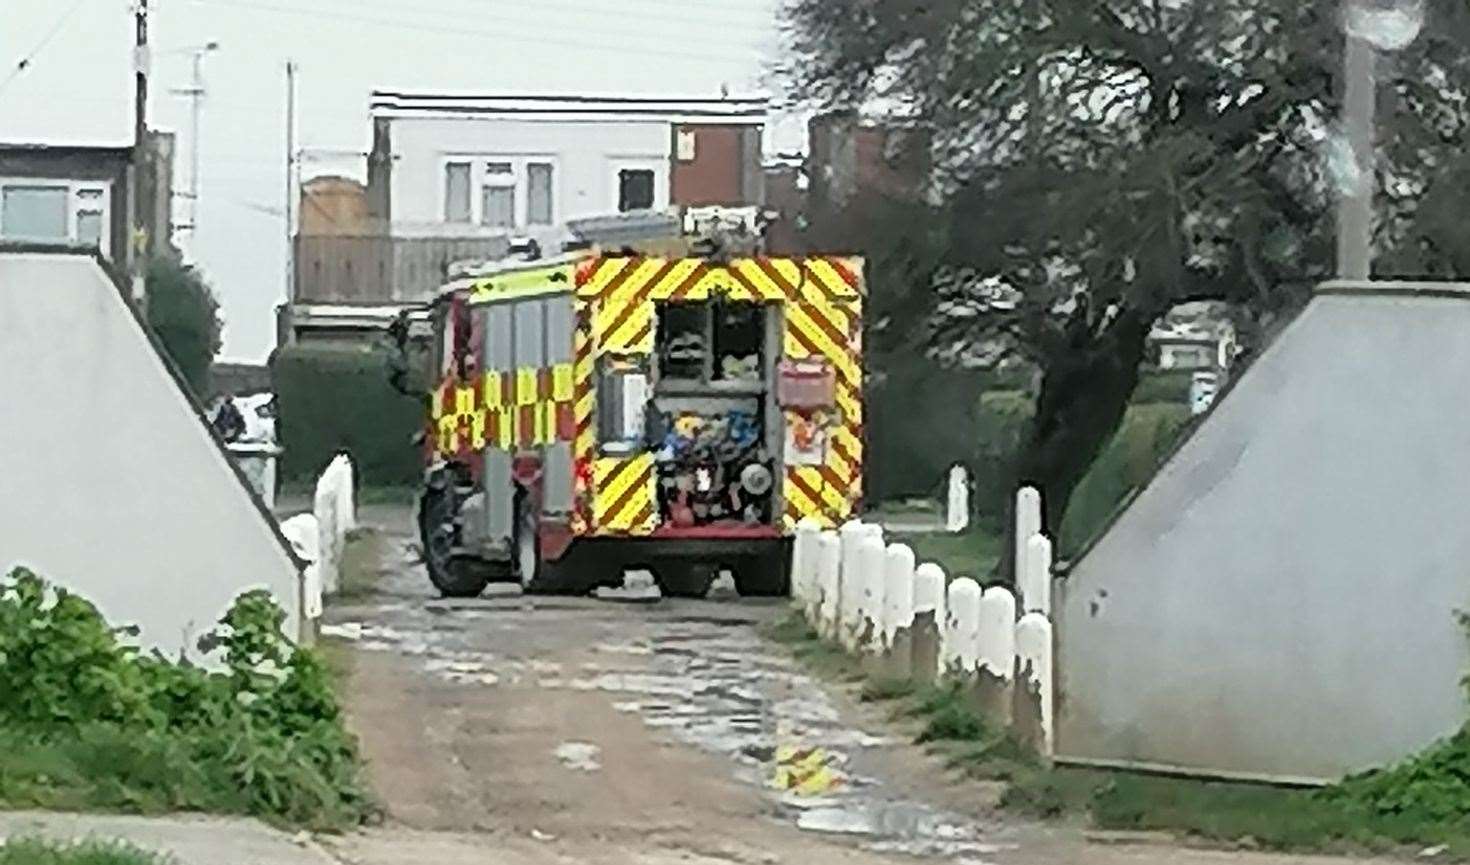 A fire engine in Nutts Avenue, Leysdown. Picture: Gary Howells (45421138)